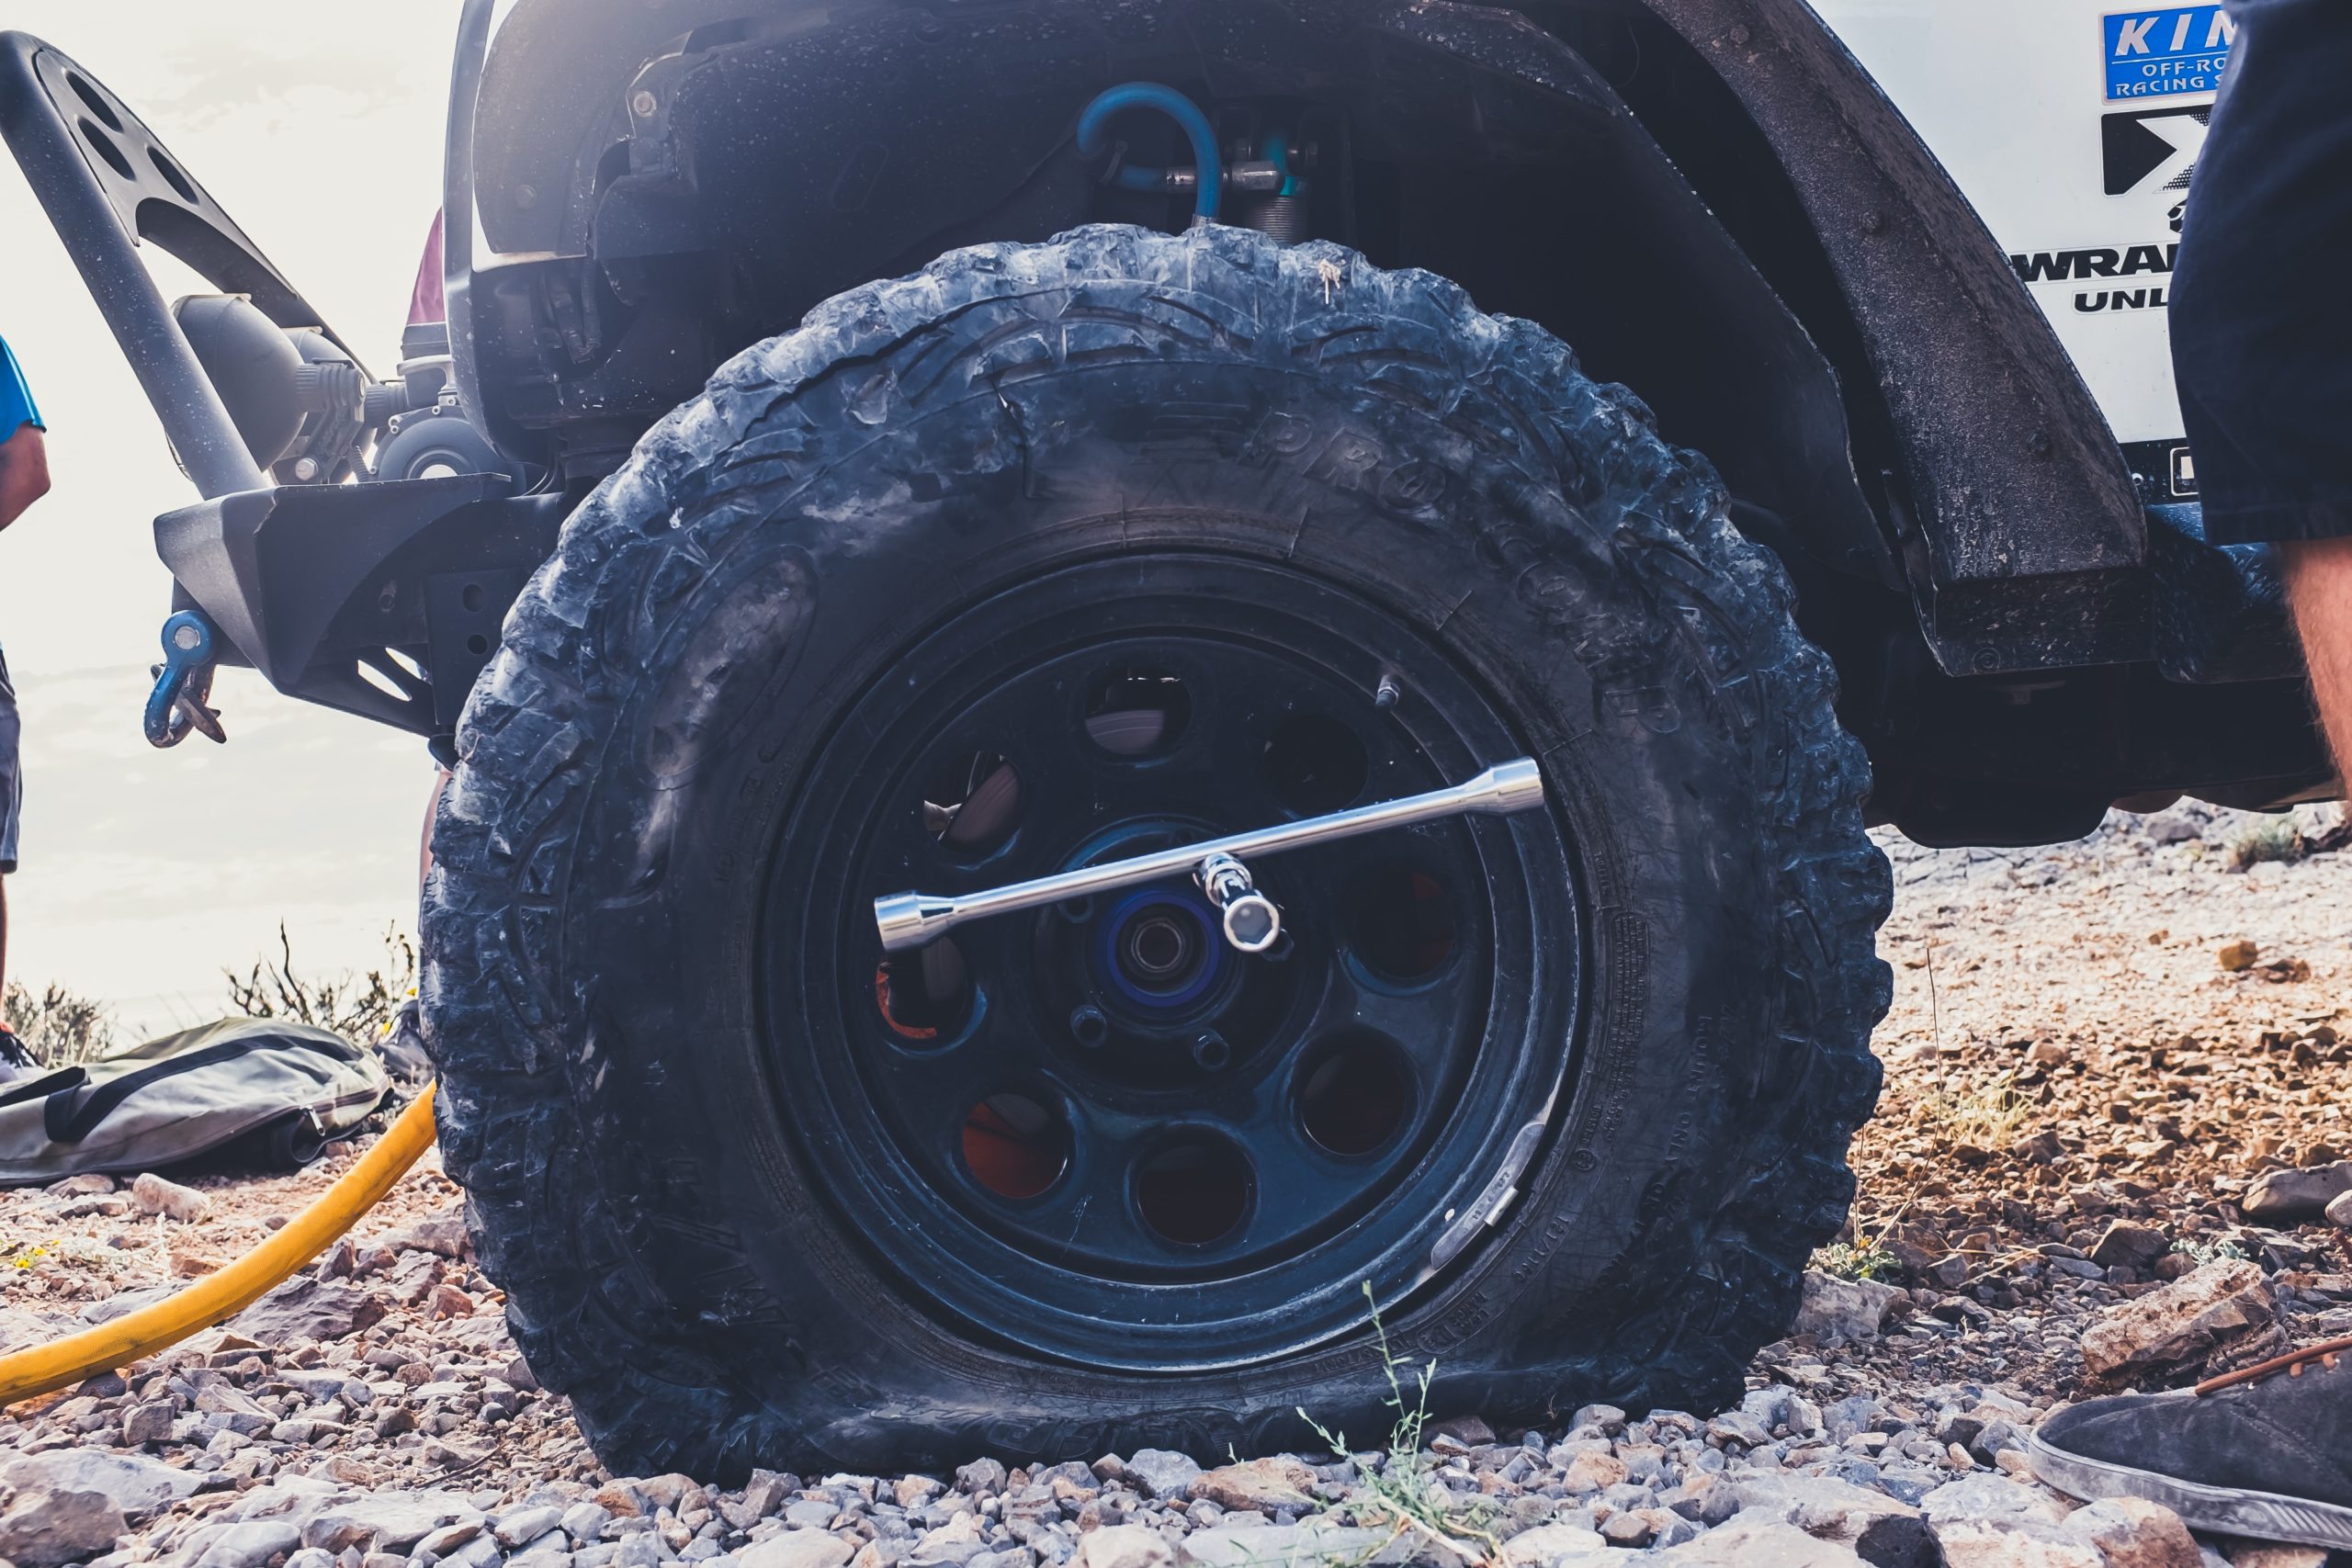 A close-up of vehicle shows a flat tire with a torque wrench wedged in the hub.